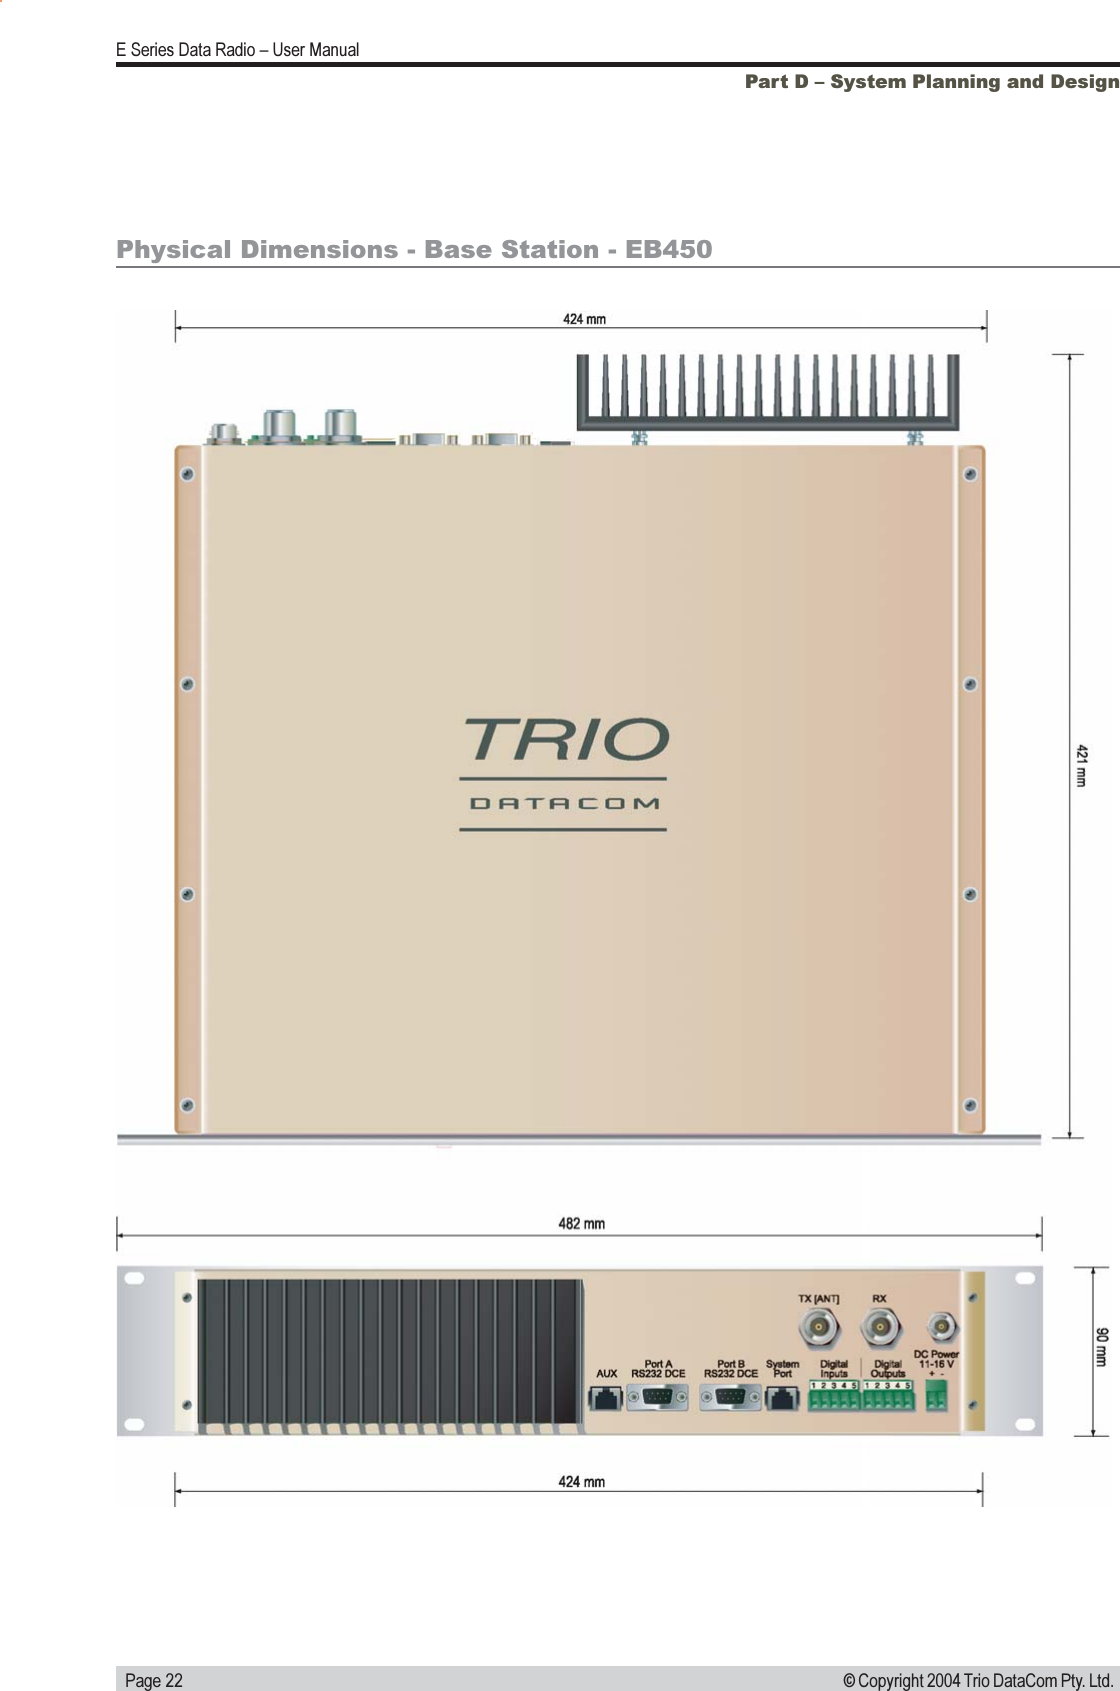   Page 22E Series Data Radio  User Manual© Copyright 2004 Trio DataCom Pty. Ltd.Physical Dimensions - Base Station - EB450Part D  System Planning and Design